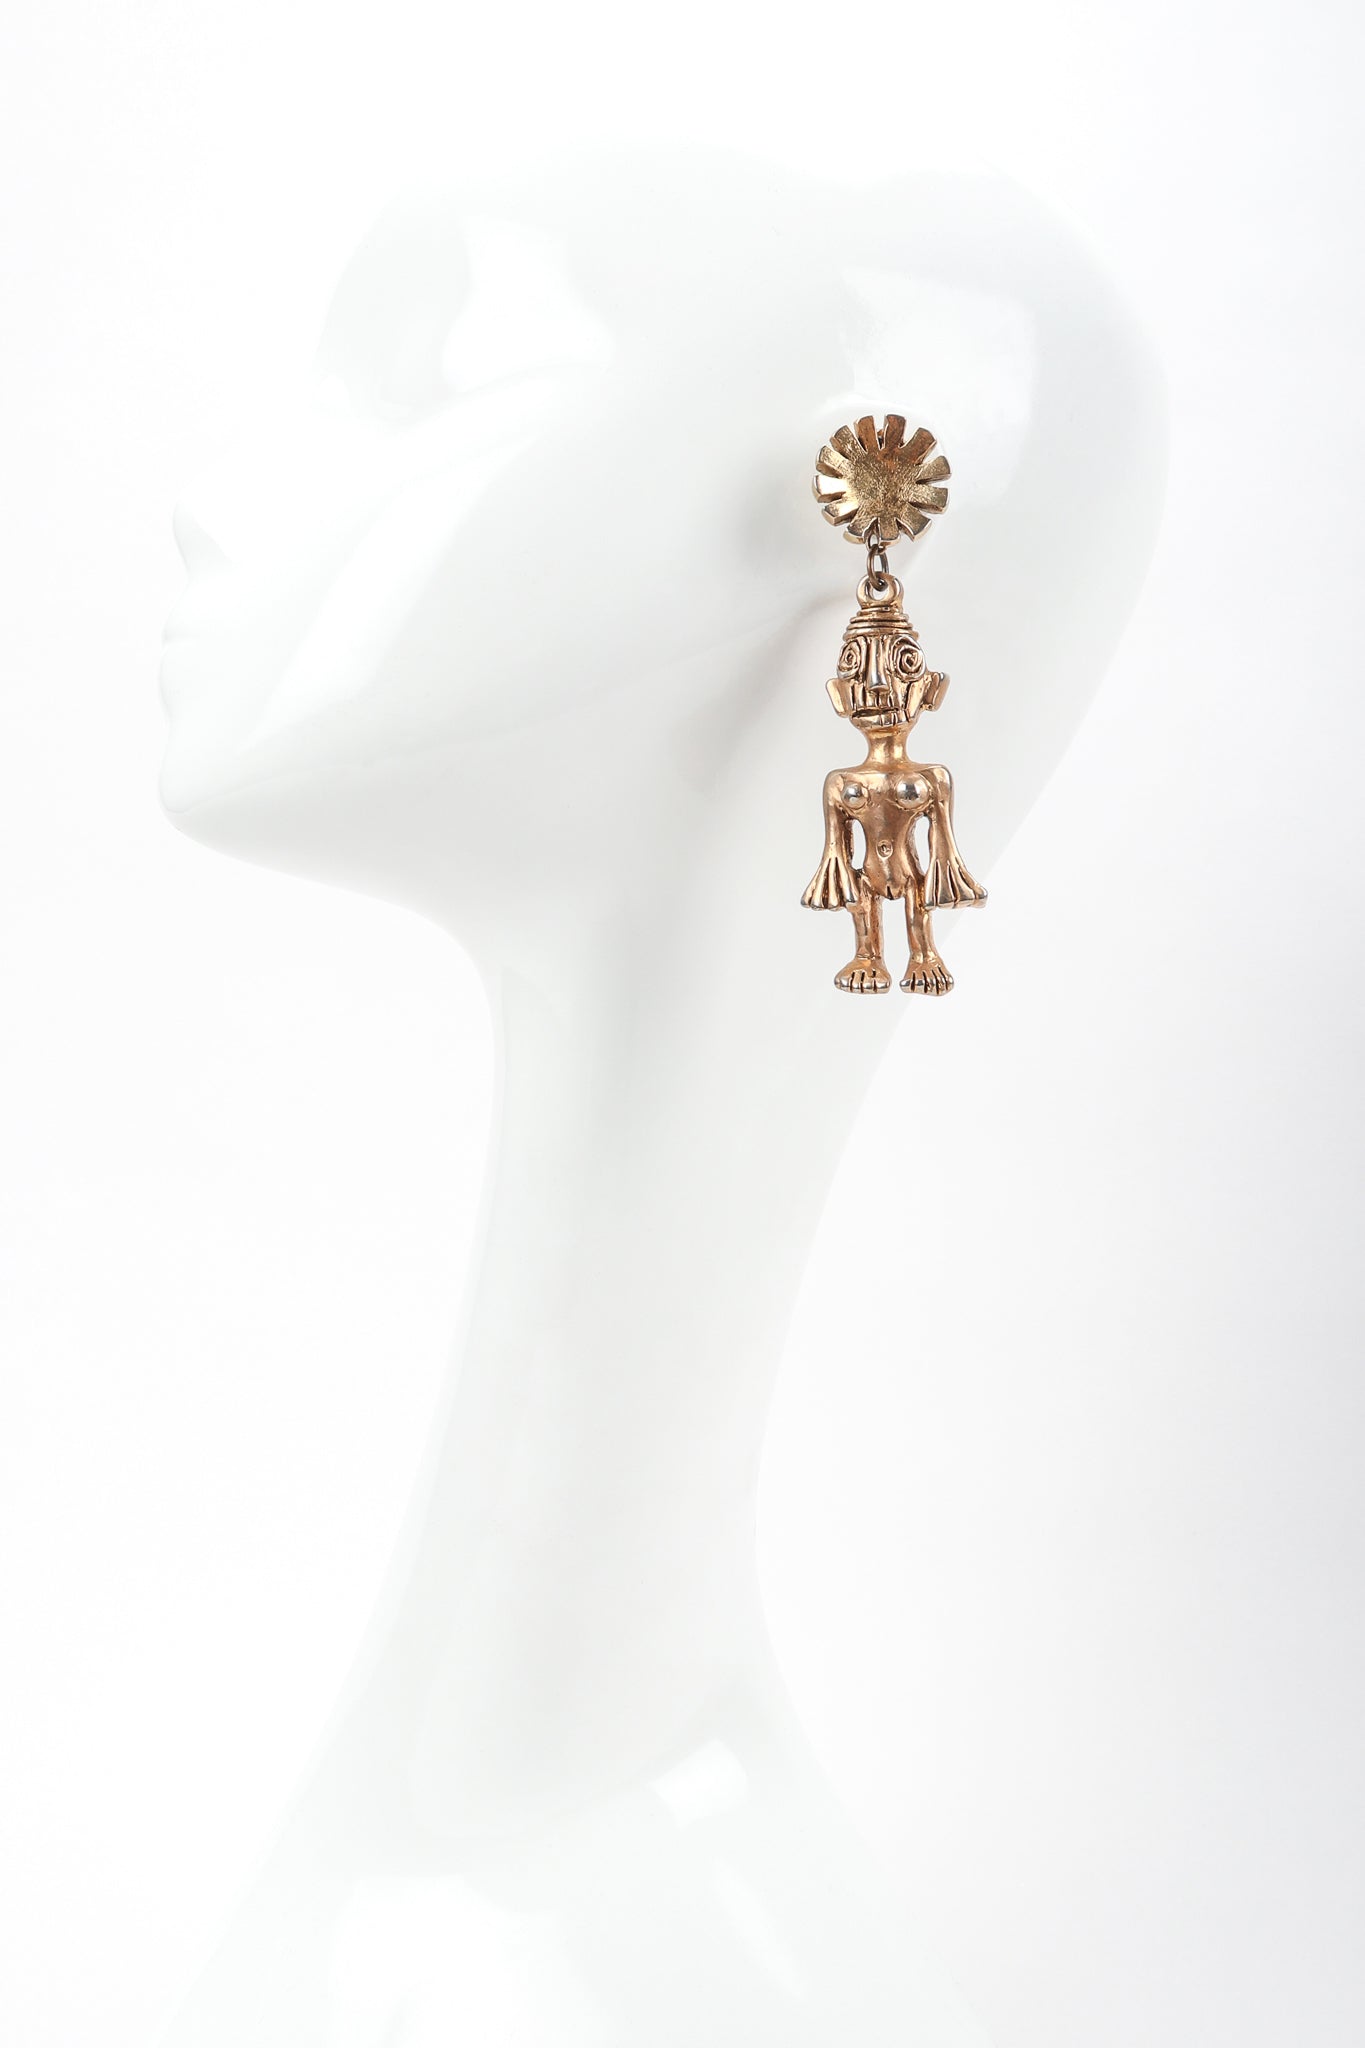 Recess Vintage Scooter Gold Mayan Incan Aztec Style Figurine Earrings on Mannequin